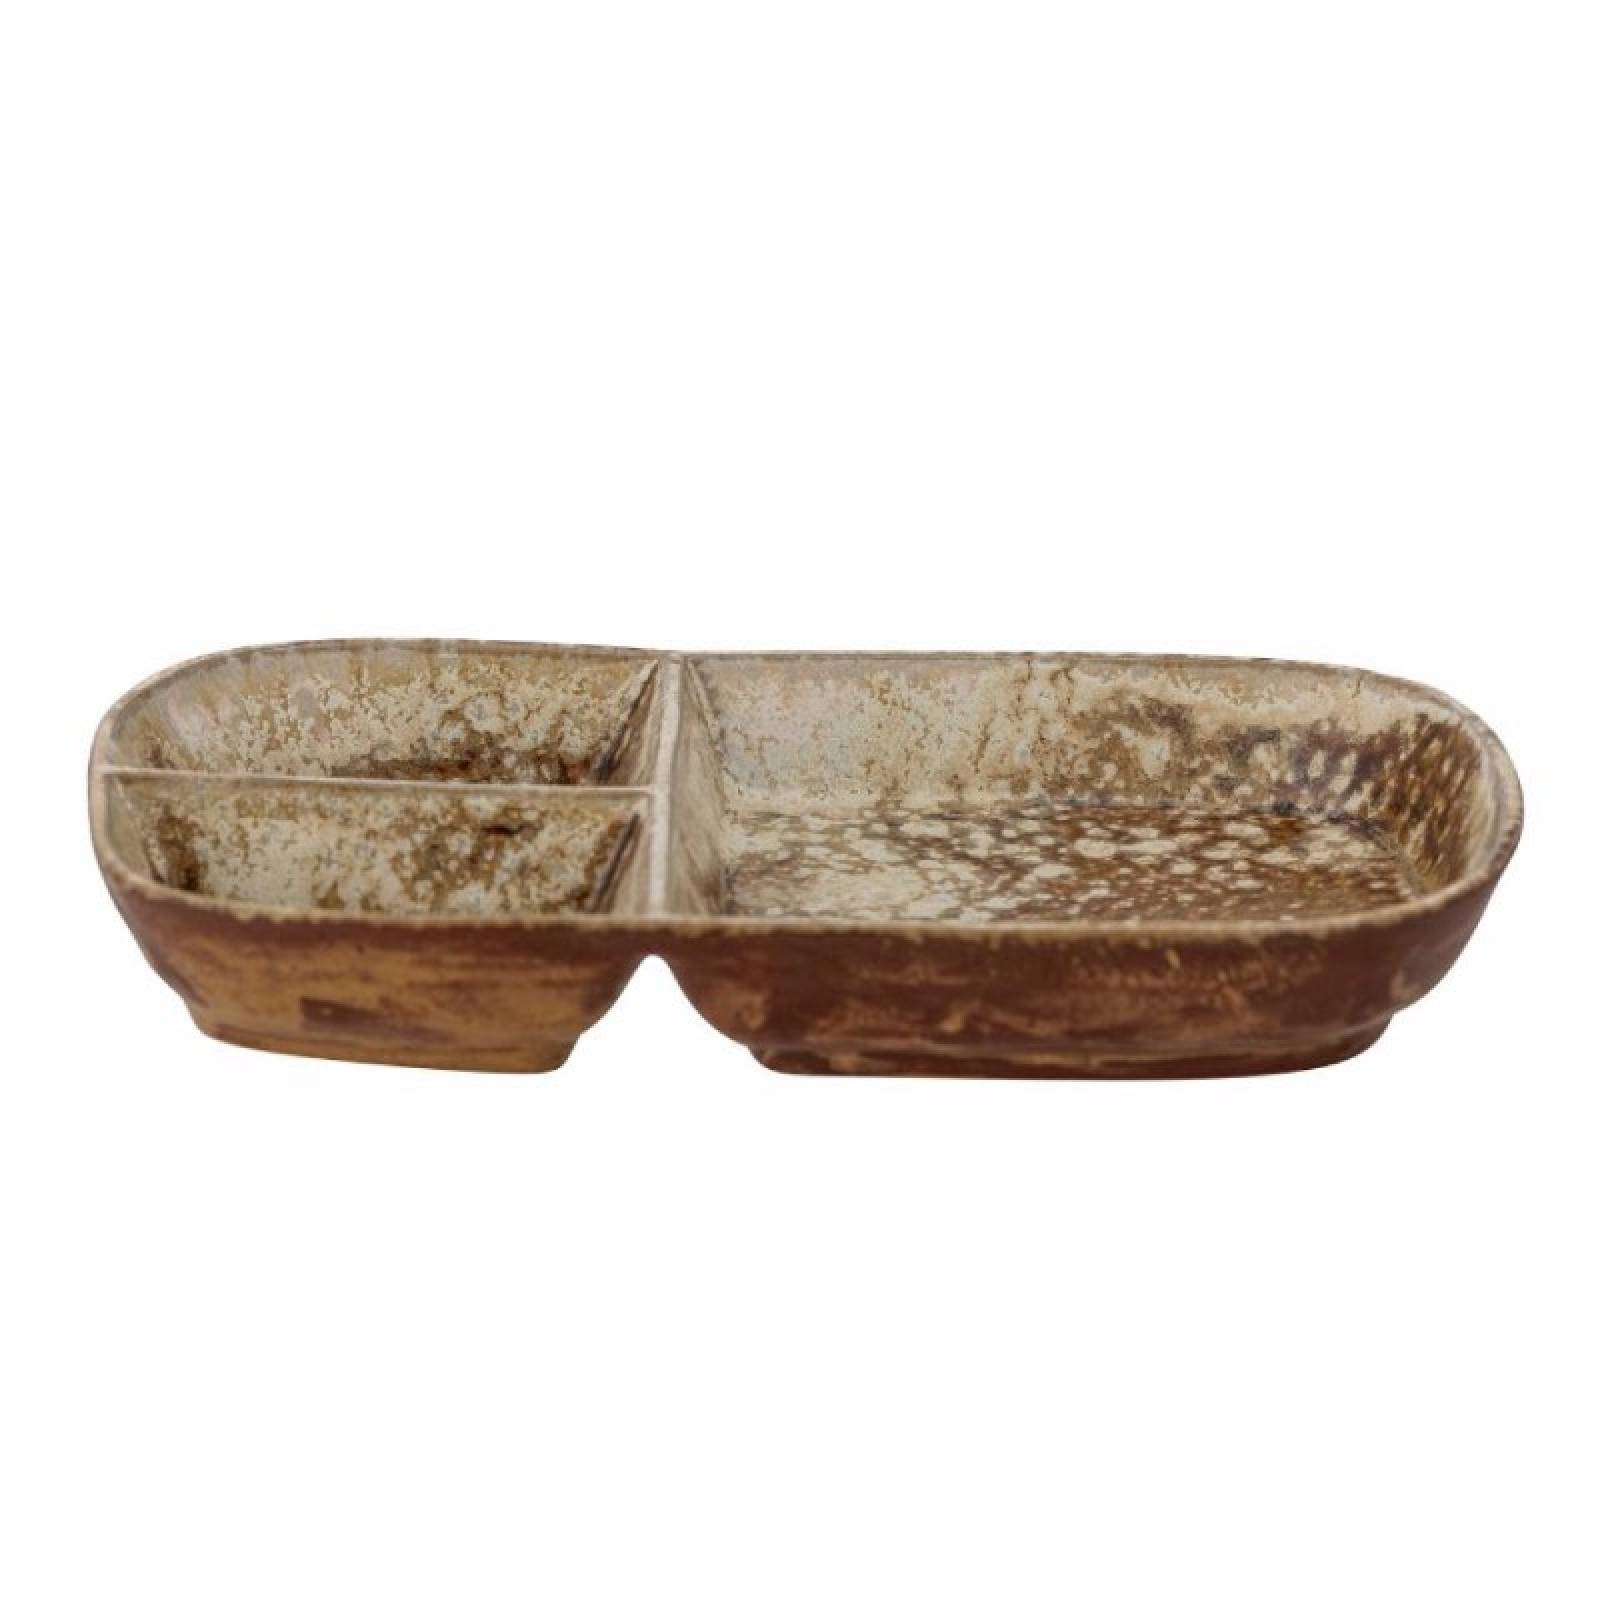 Brown Stoneware Tray With Divided Sections thumbnails